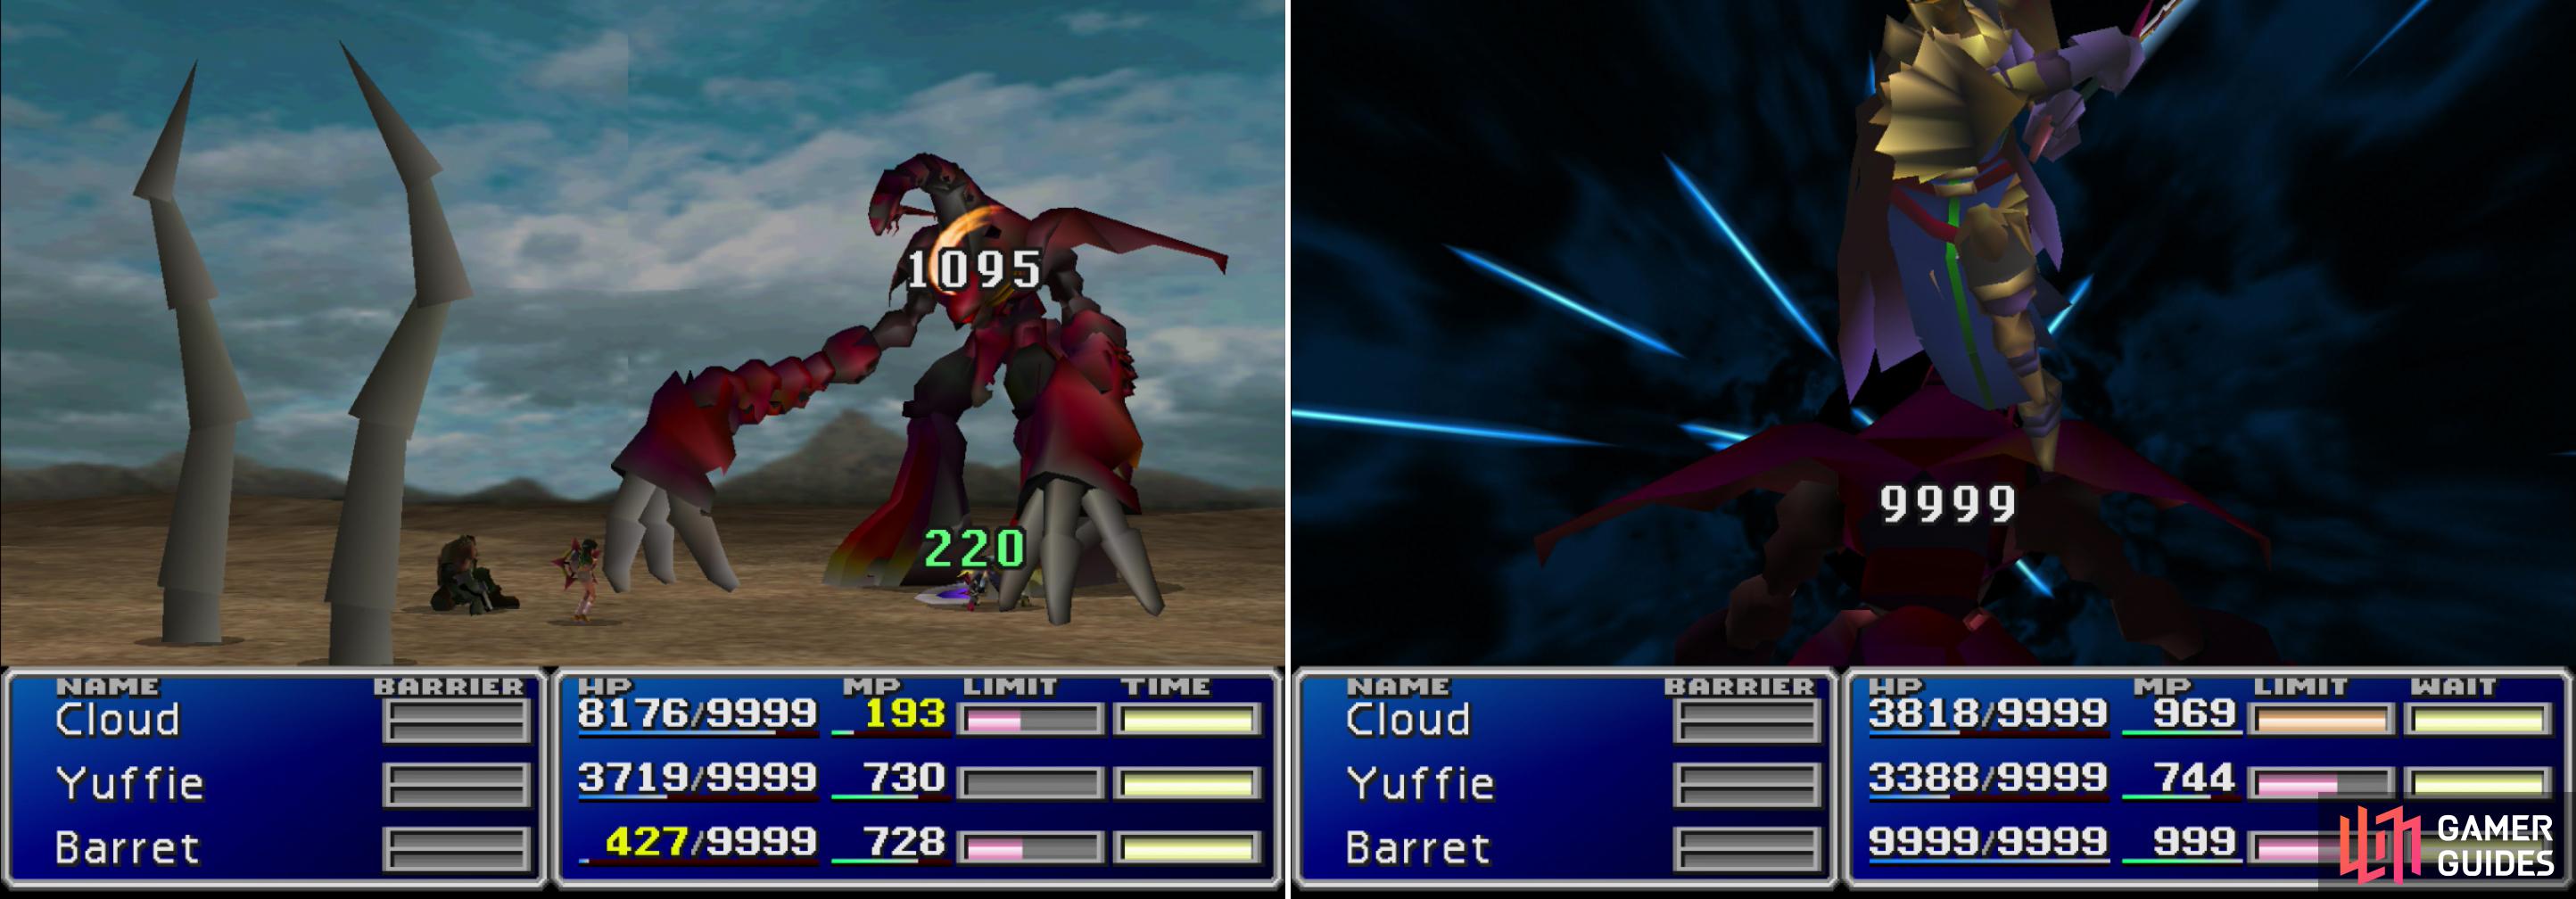 Ruby Weapon is highly resistant to physical attacks (left) so the Command Materia Strategy won't work here. Knights of the Round - perhaps boosted with MP Turbo - will deal massive damage, however (right).